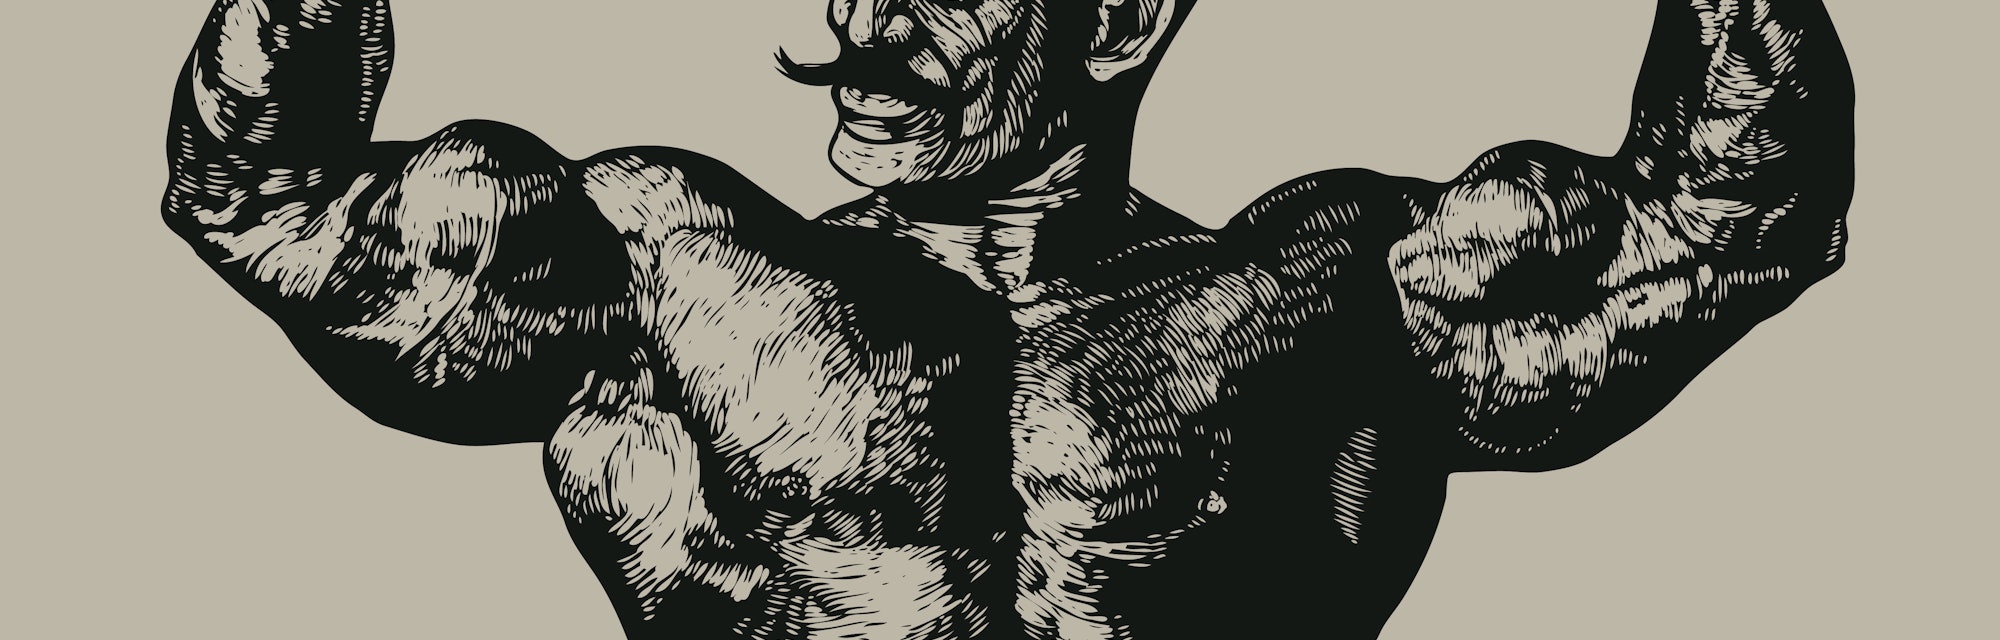 Bodybuilder with a mustache. Retro Engraving Linocut Style. Vector Illustration.